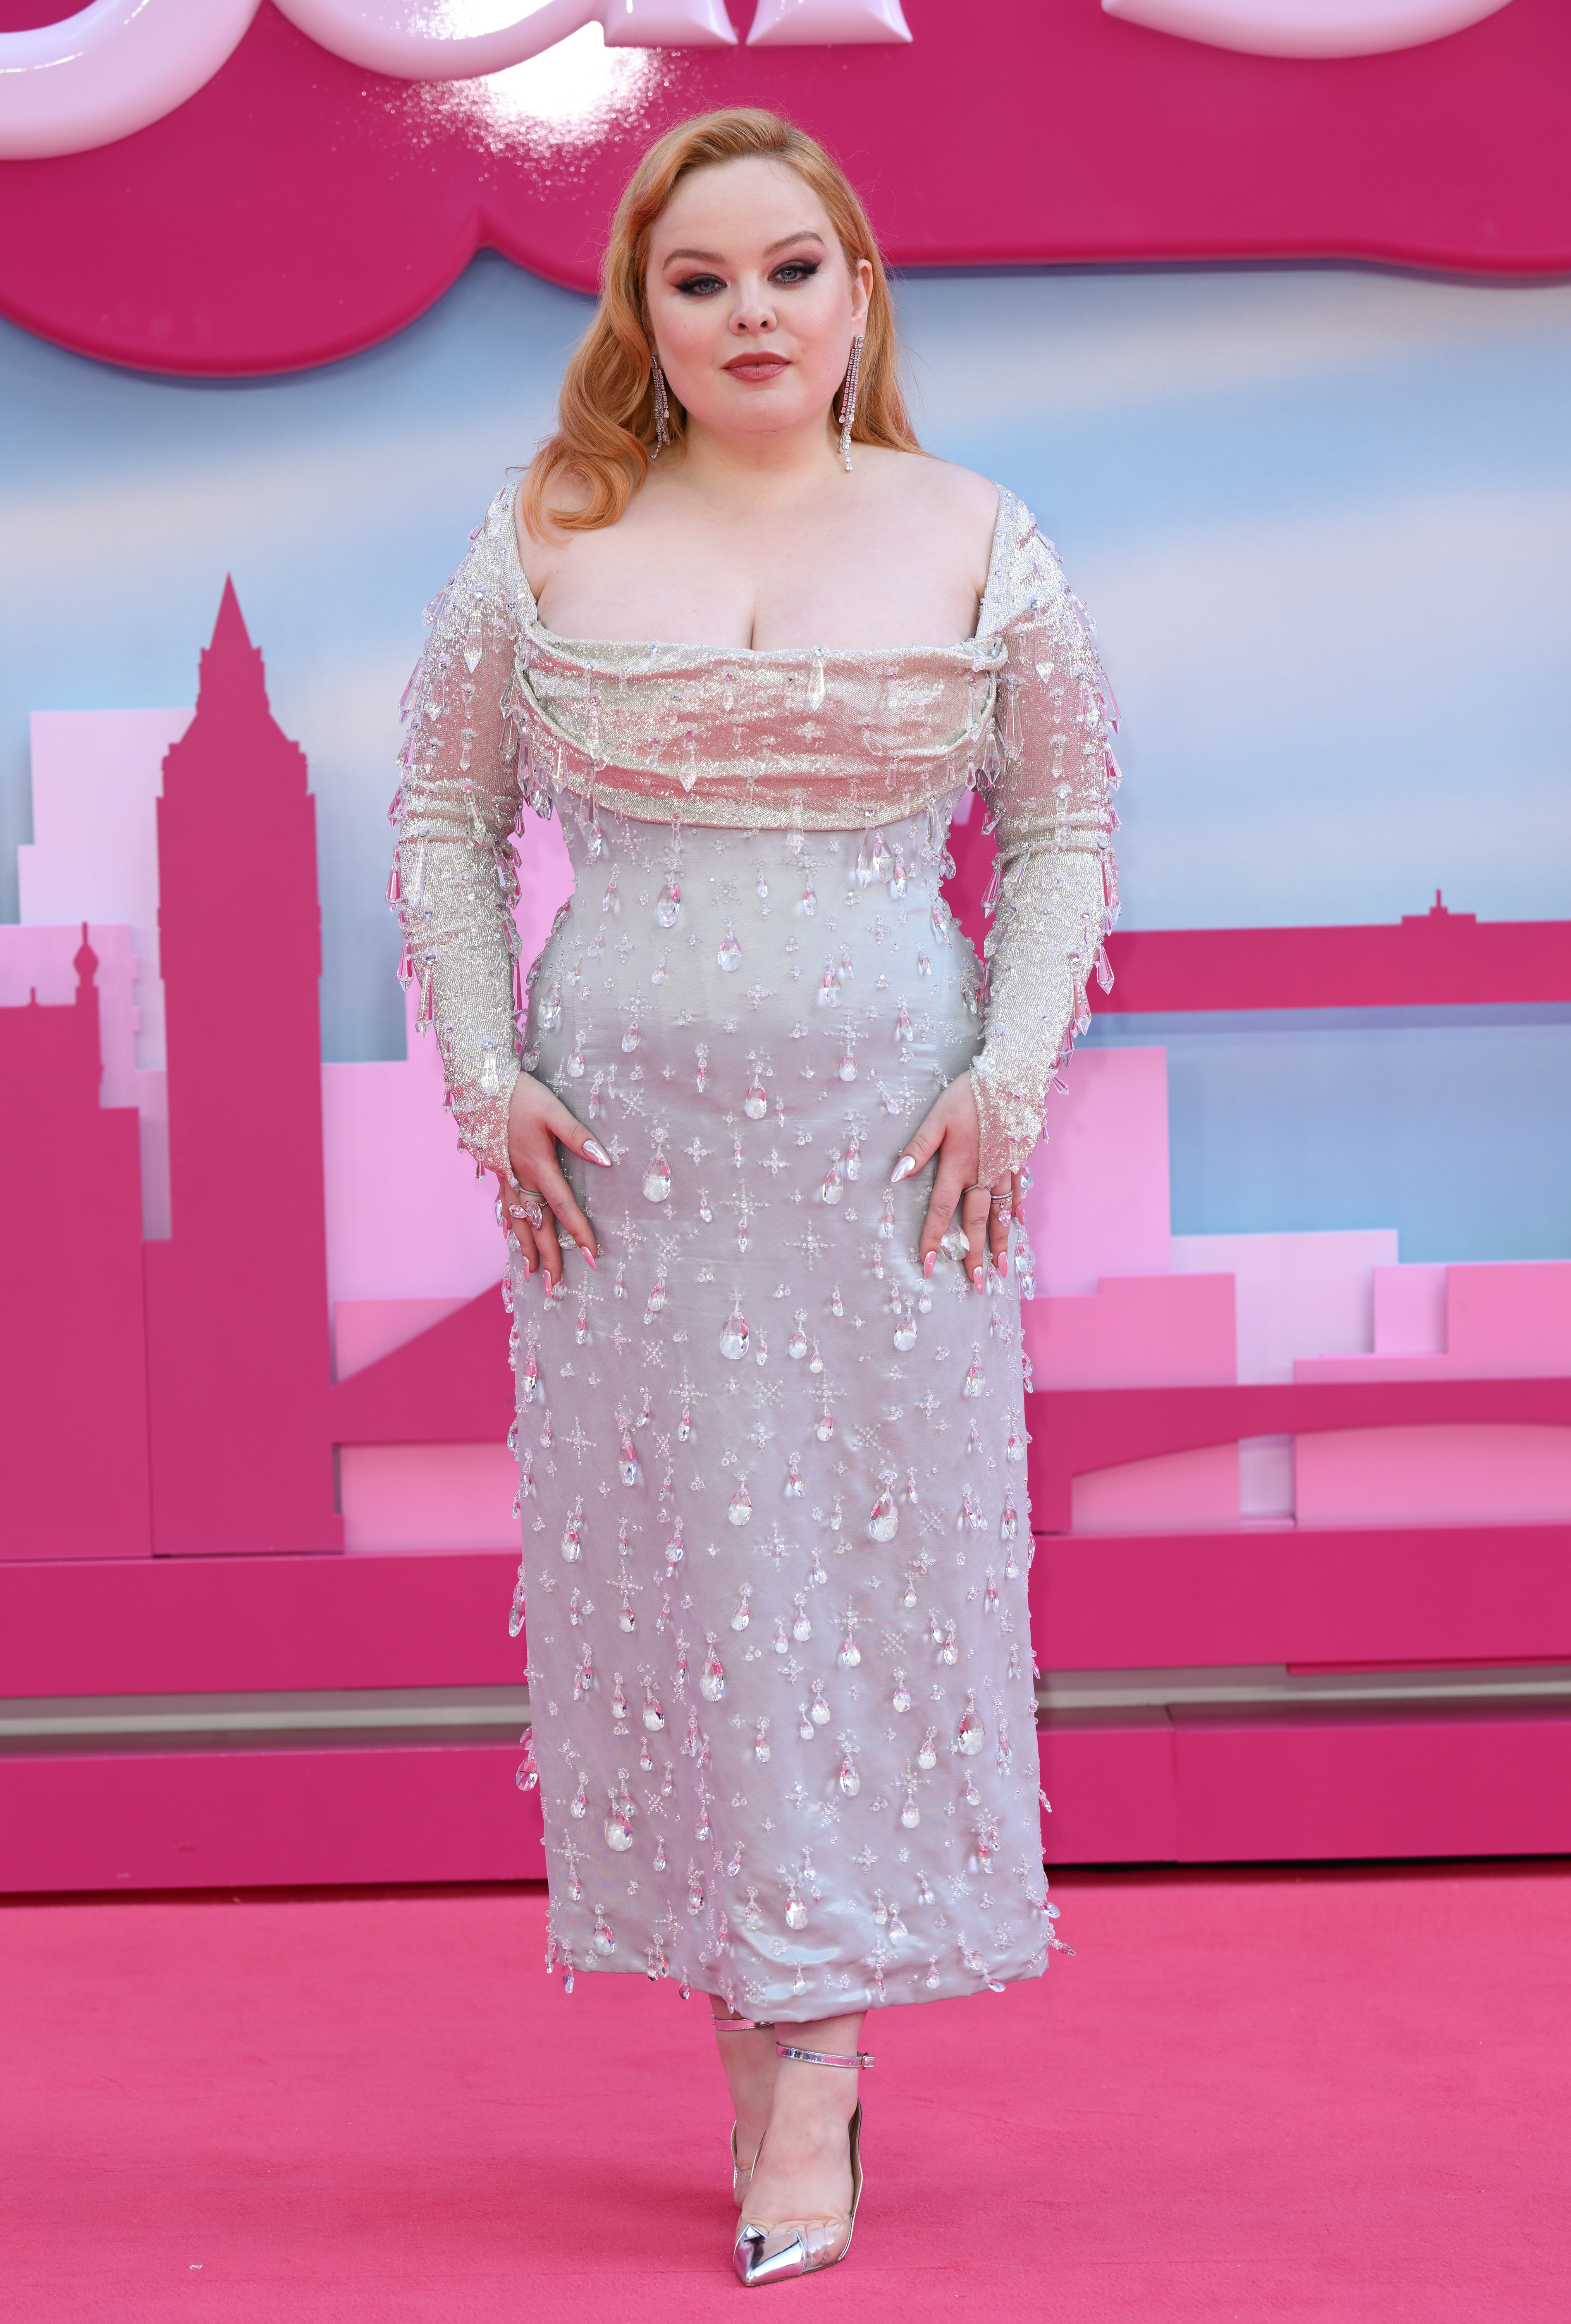 Close-up of Nicola on the pink carpet in the long-sleeved, ankle-length dress